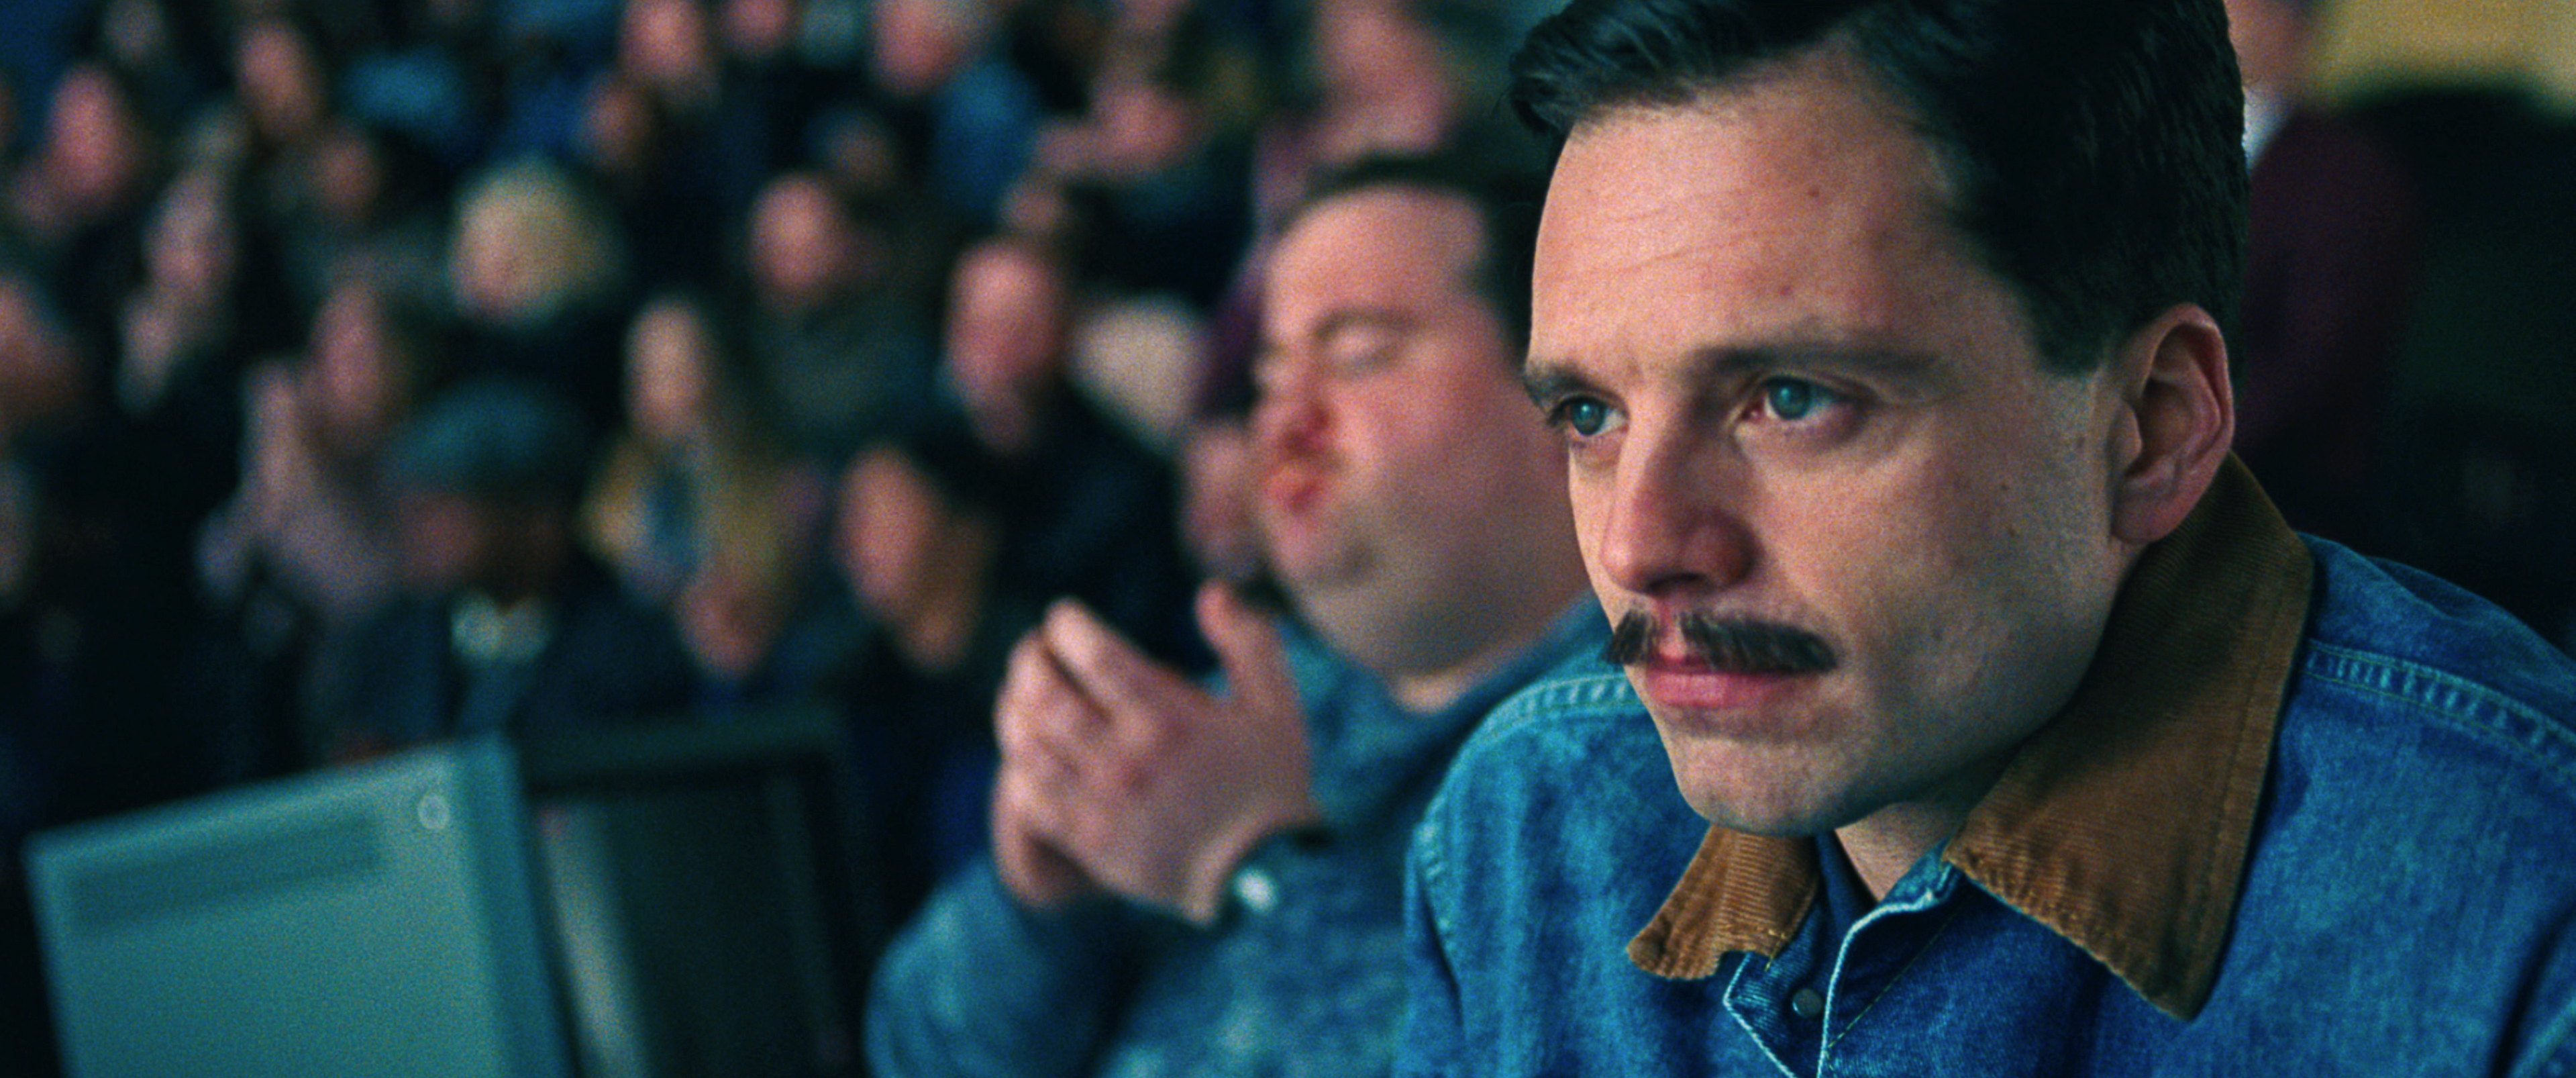 2- Jeff Gillooly (Sebastian Stan) watches a routine in I, TONYA, courtesy of NEON and 30WEST